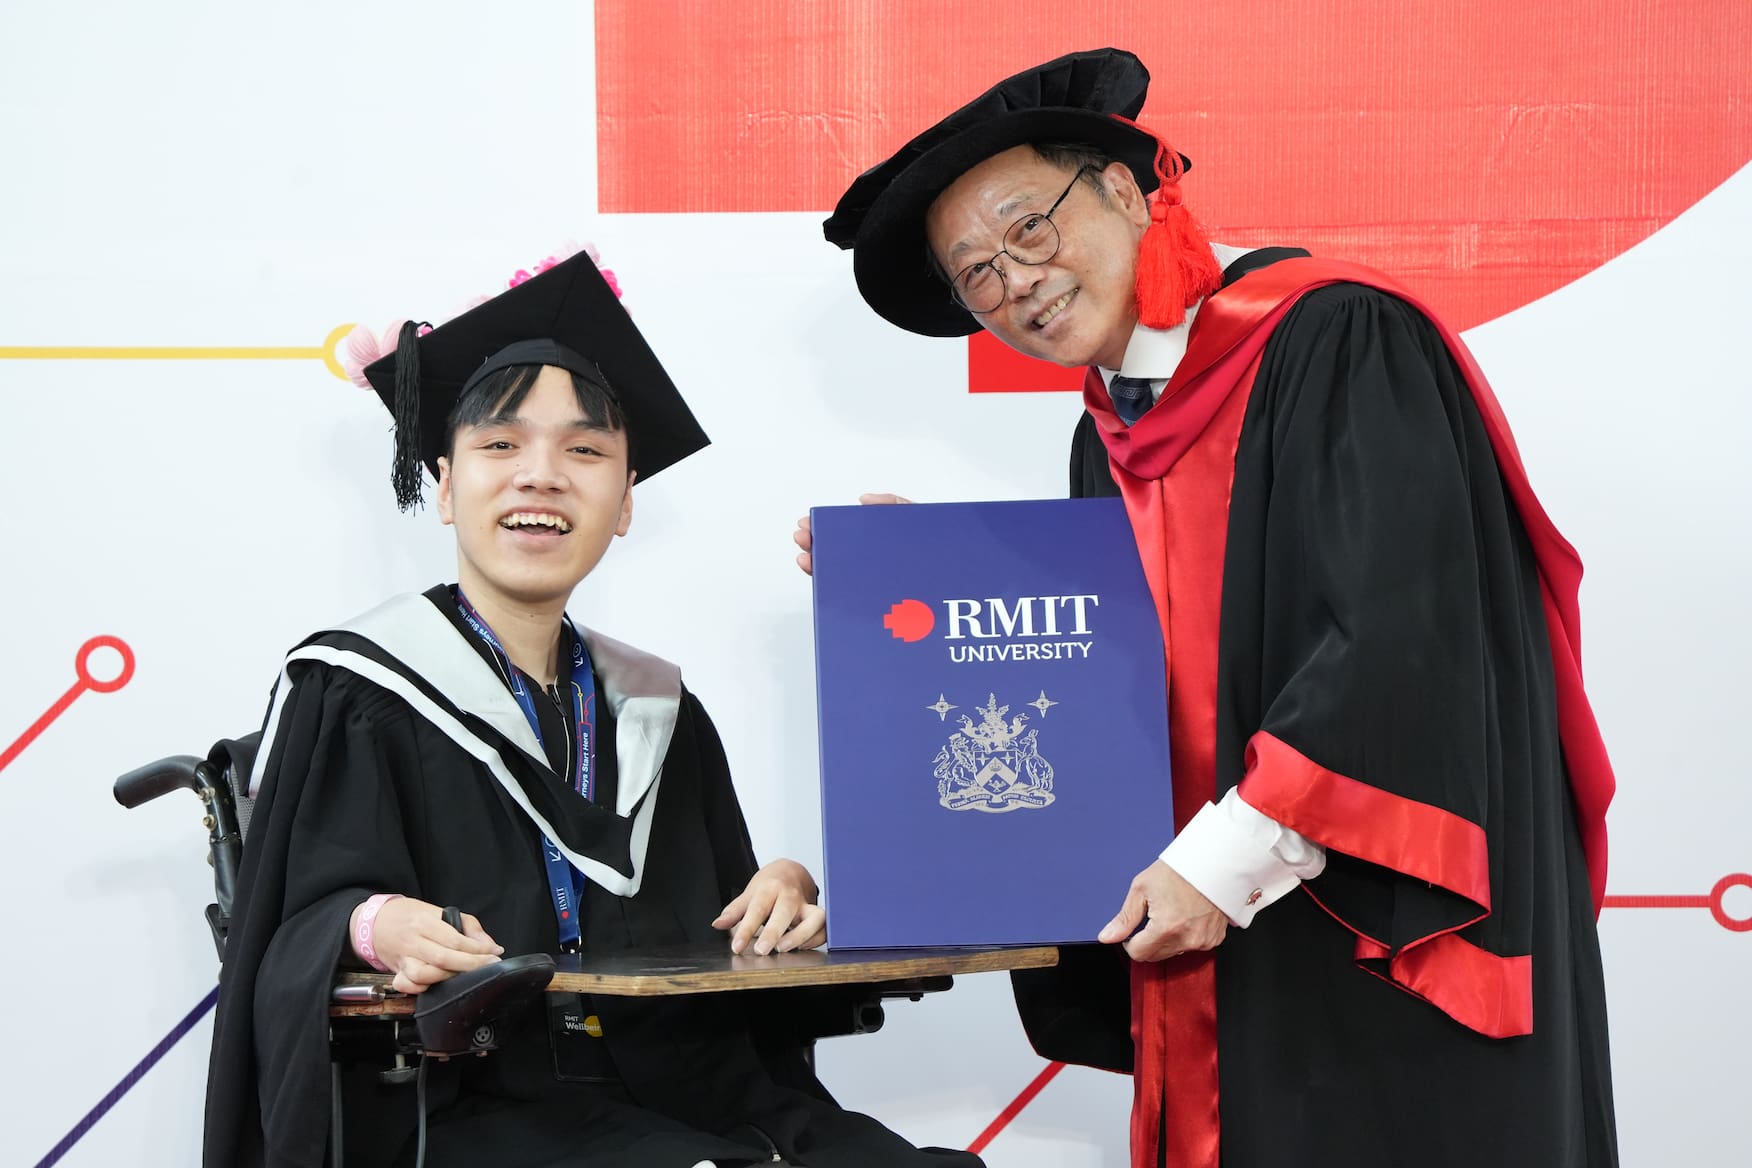 Alt Text is not present for this image, Taking dc:title 'news-1-rmit-inclusive-support-brings-potentials-out-of-graduates'